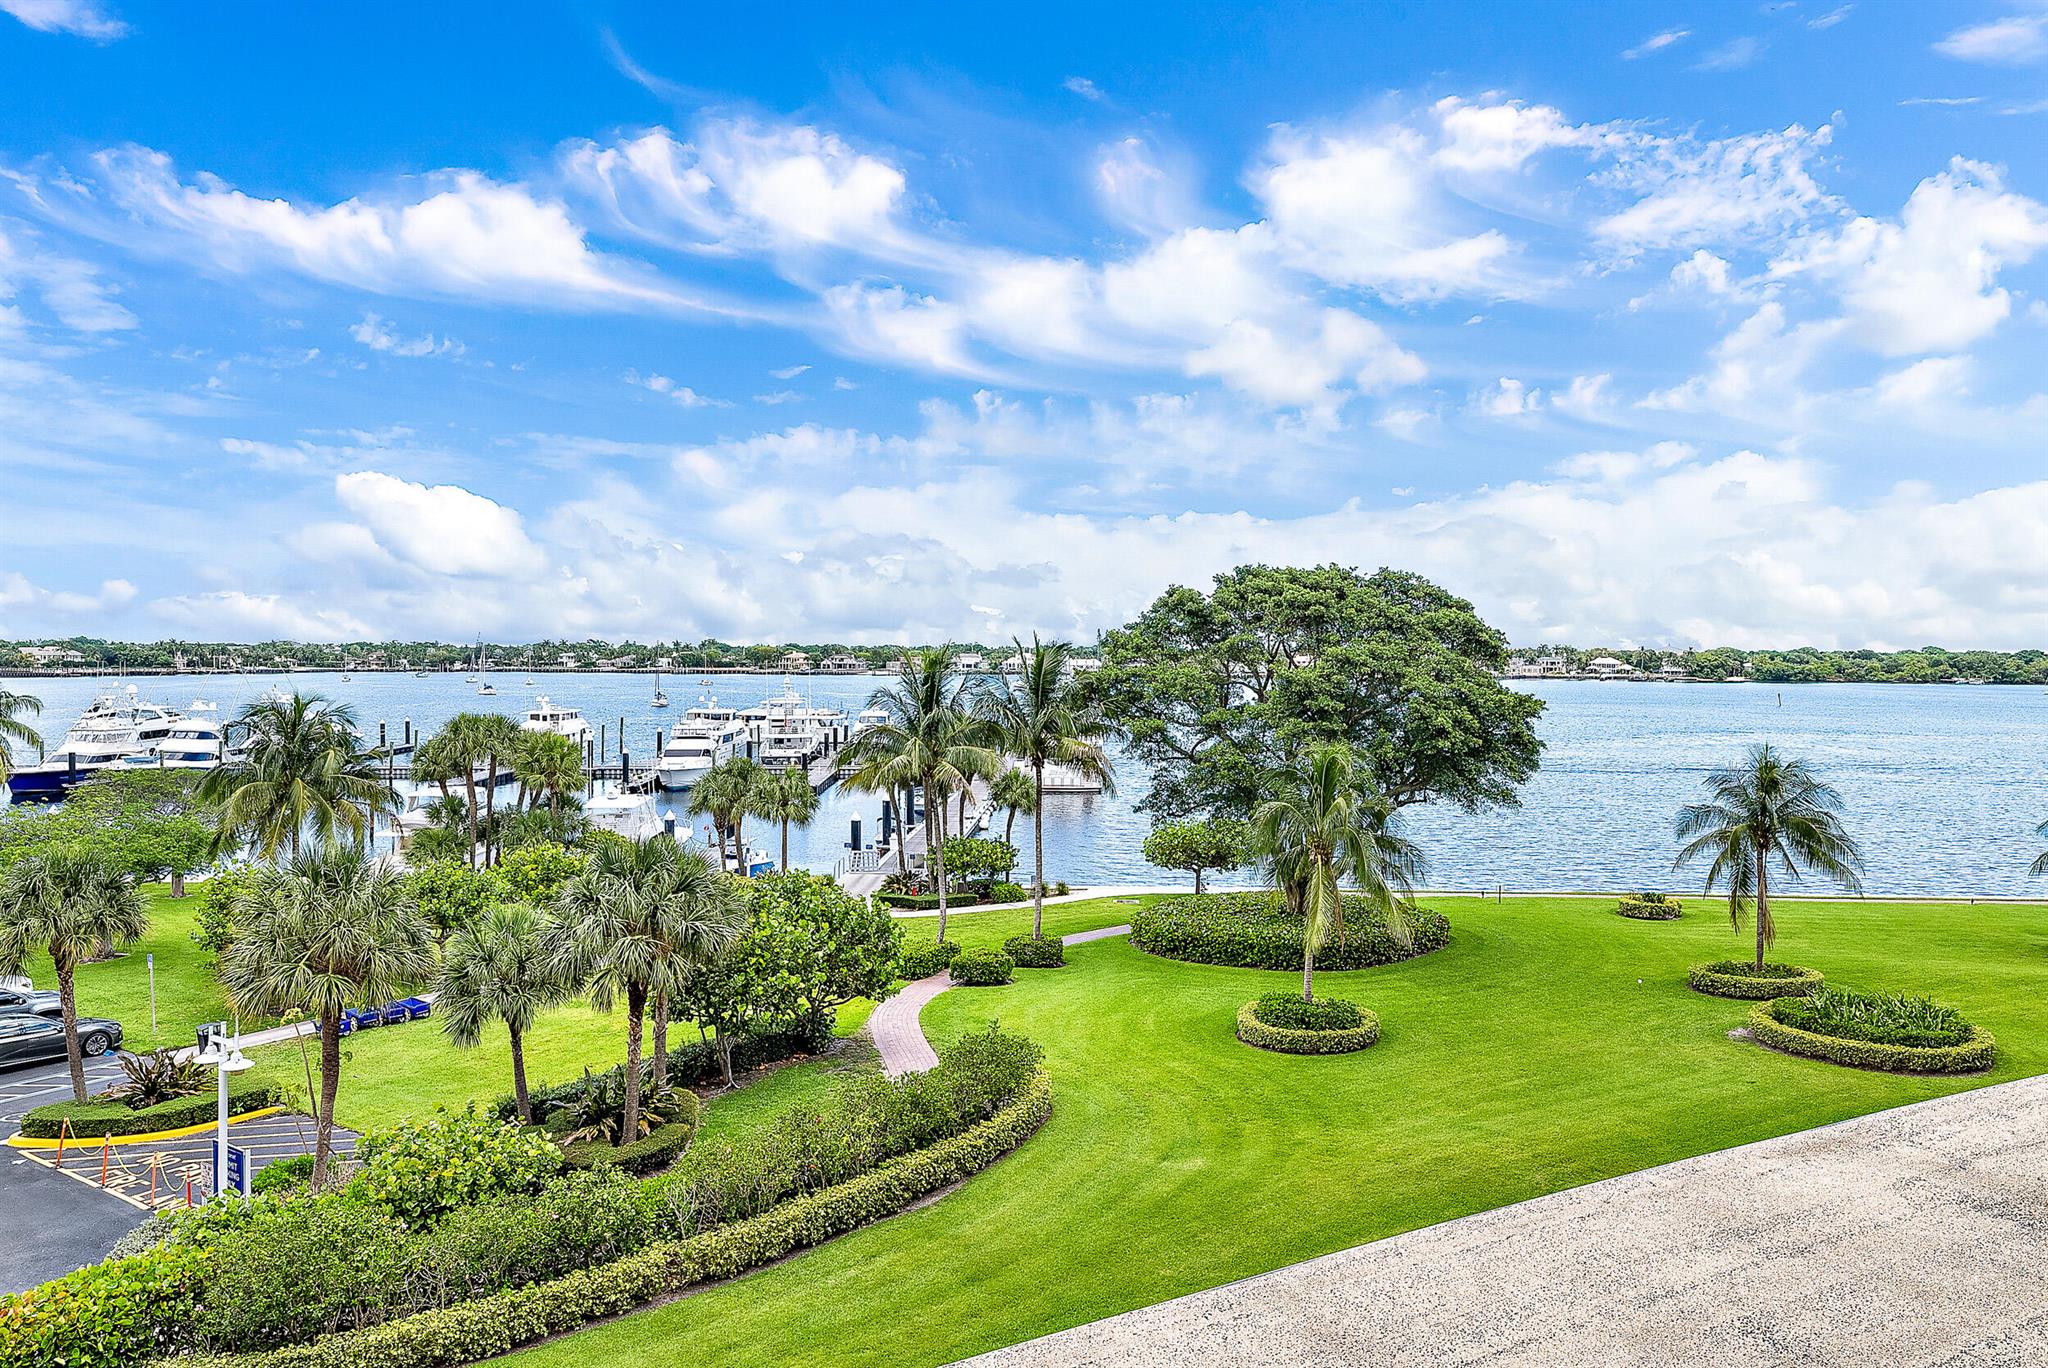 Enjoy a panoramic view on the intracoastal waterway for $395,000? Yes! This 2 bedroom, 2 bathroom condo in Quay North at Old Port Cove is new to the market. This gated community offers its own restaurant and marina as well as a heated pool with sauna, showers and a fitness center. Stay fit with 2 miles of walking paths along the water marked in 1/4 mile increments with rest stops along the way. Enjoy the beautiful nearby North Palm Beach Country Club with a Jack Nicklaus designed golf course, pool, tennis courts, pickleball and restaurant/bar. Multiple pristine beaches and ocean front parks are nearby as well as world class shopping including the Gardens Mall, Downtown at the Gardens, Legacy Place, Rosemary Square and Worth Avenue in Palm Beach. You'll never run out of amazing restaurant